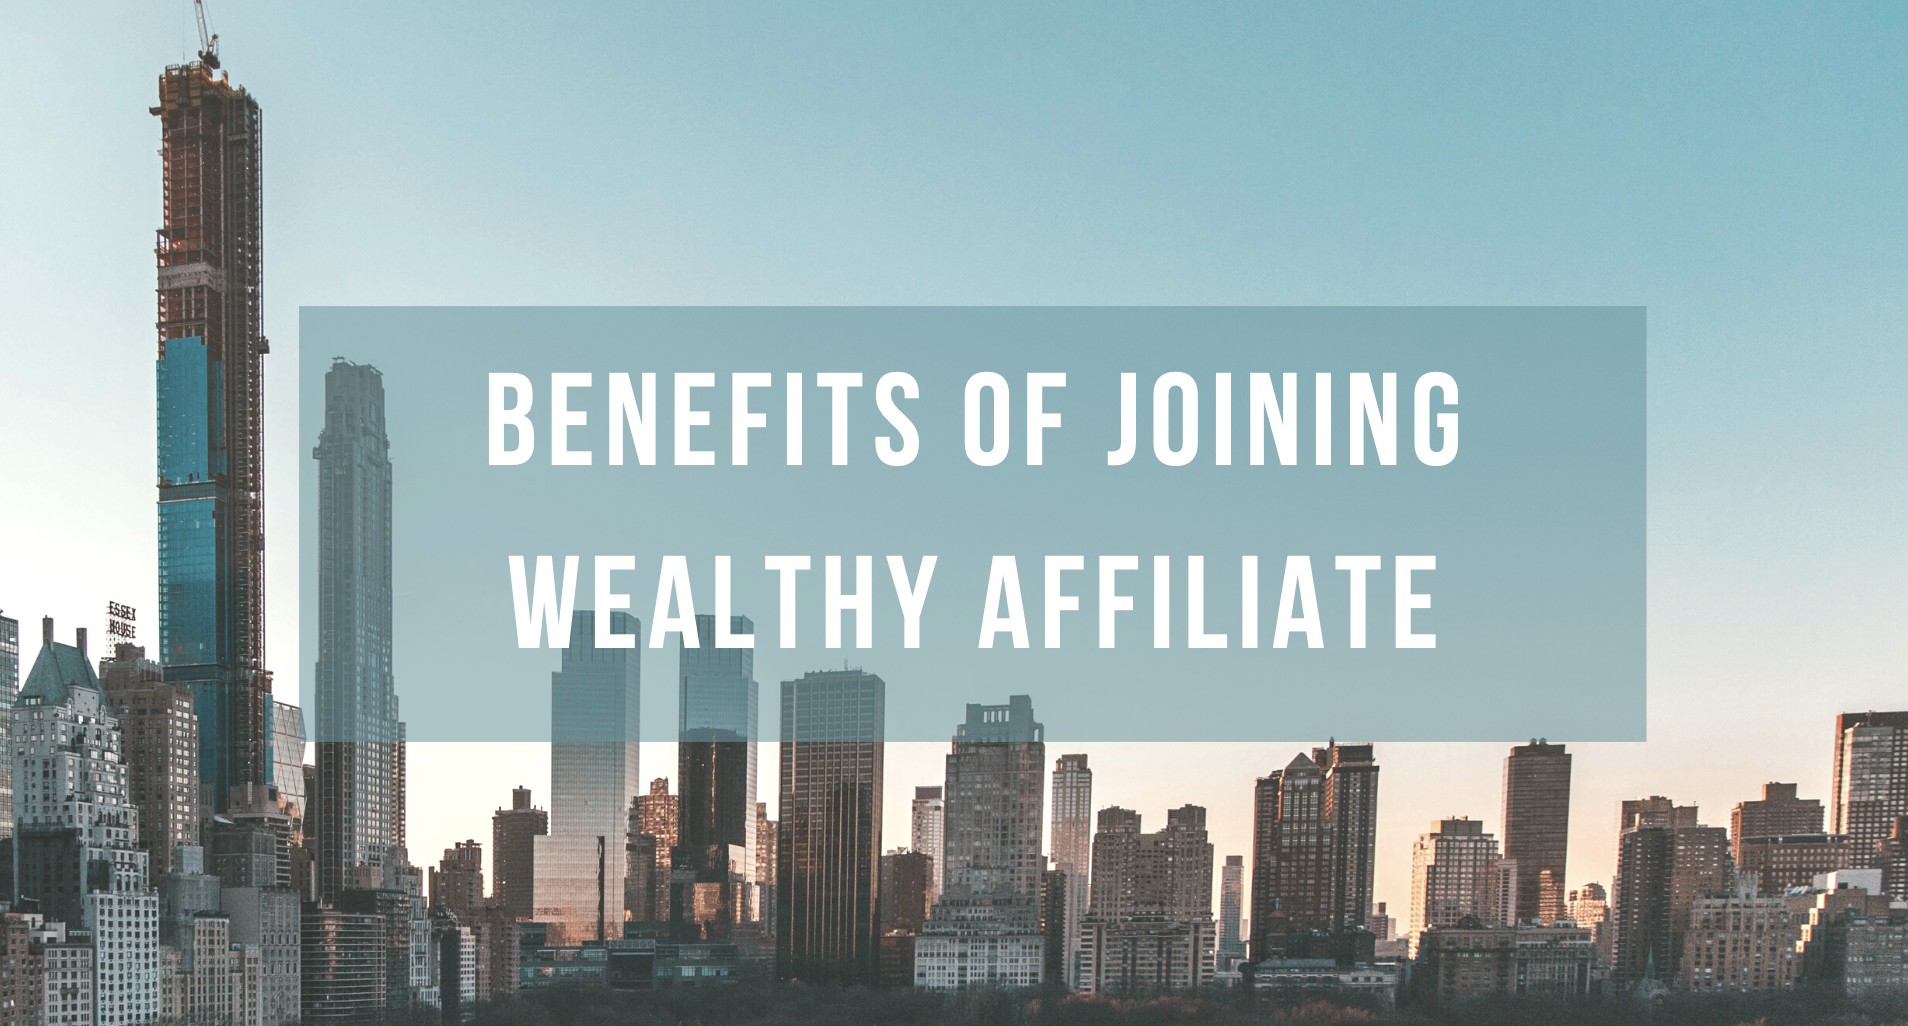 Benefits of Joining Wealthy Affiliate